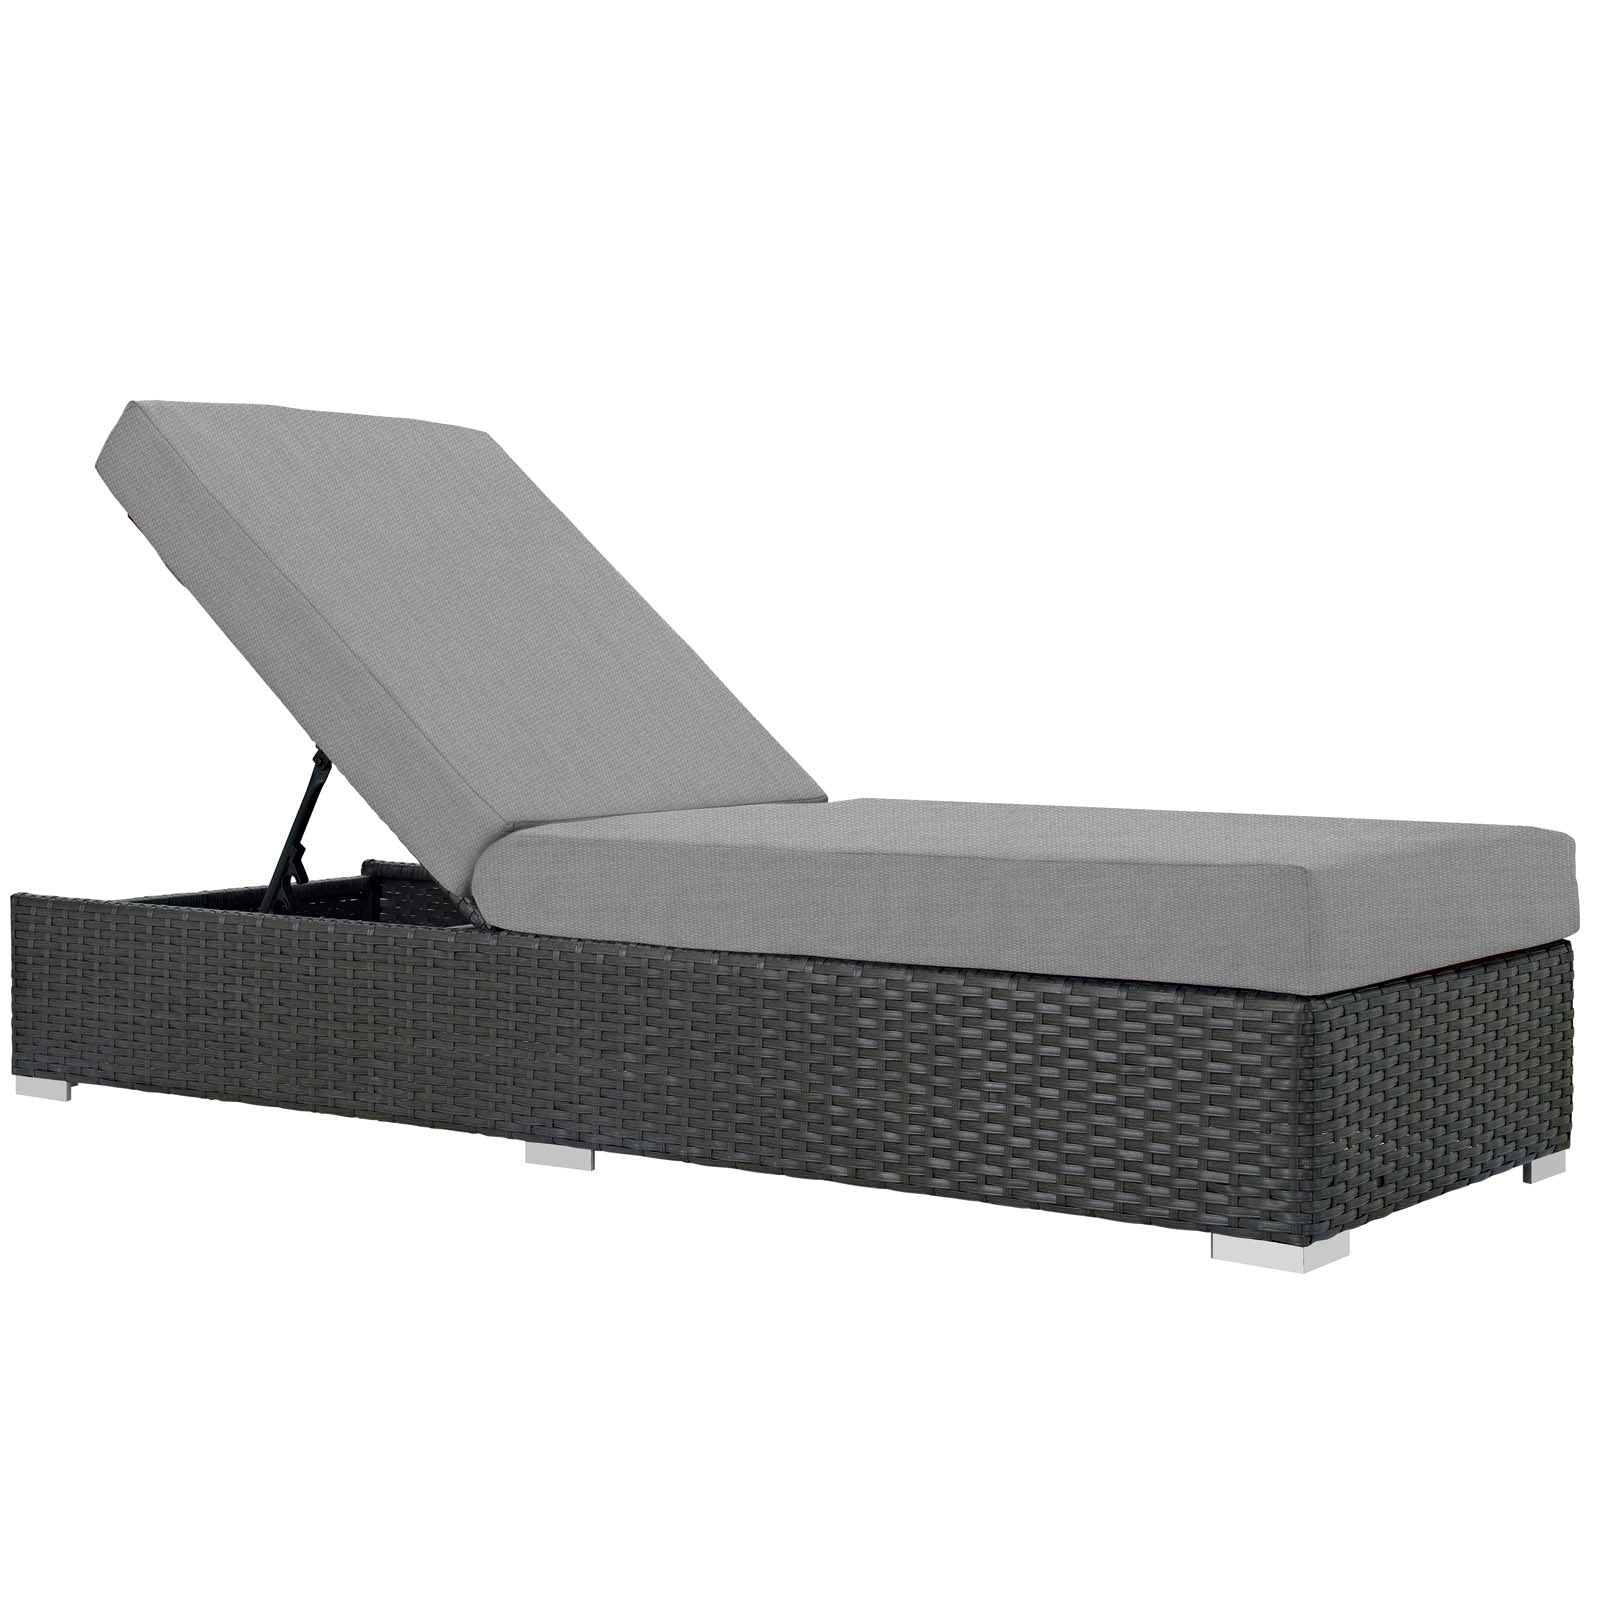 Modway Outdoor Loungers - Sojourn Outdoor Patio Sunbrella Chaise Lounge Canvas Gray